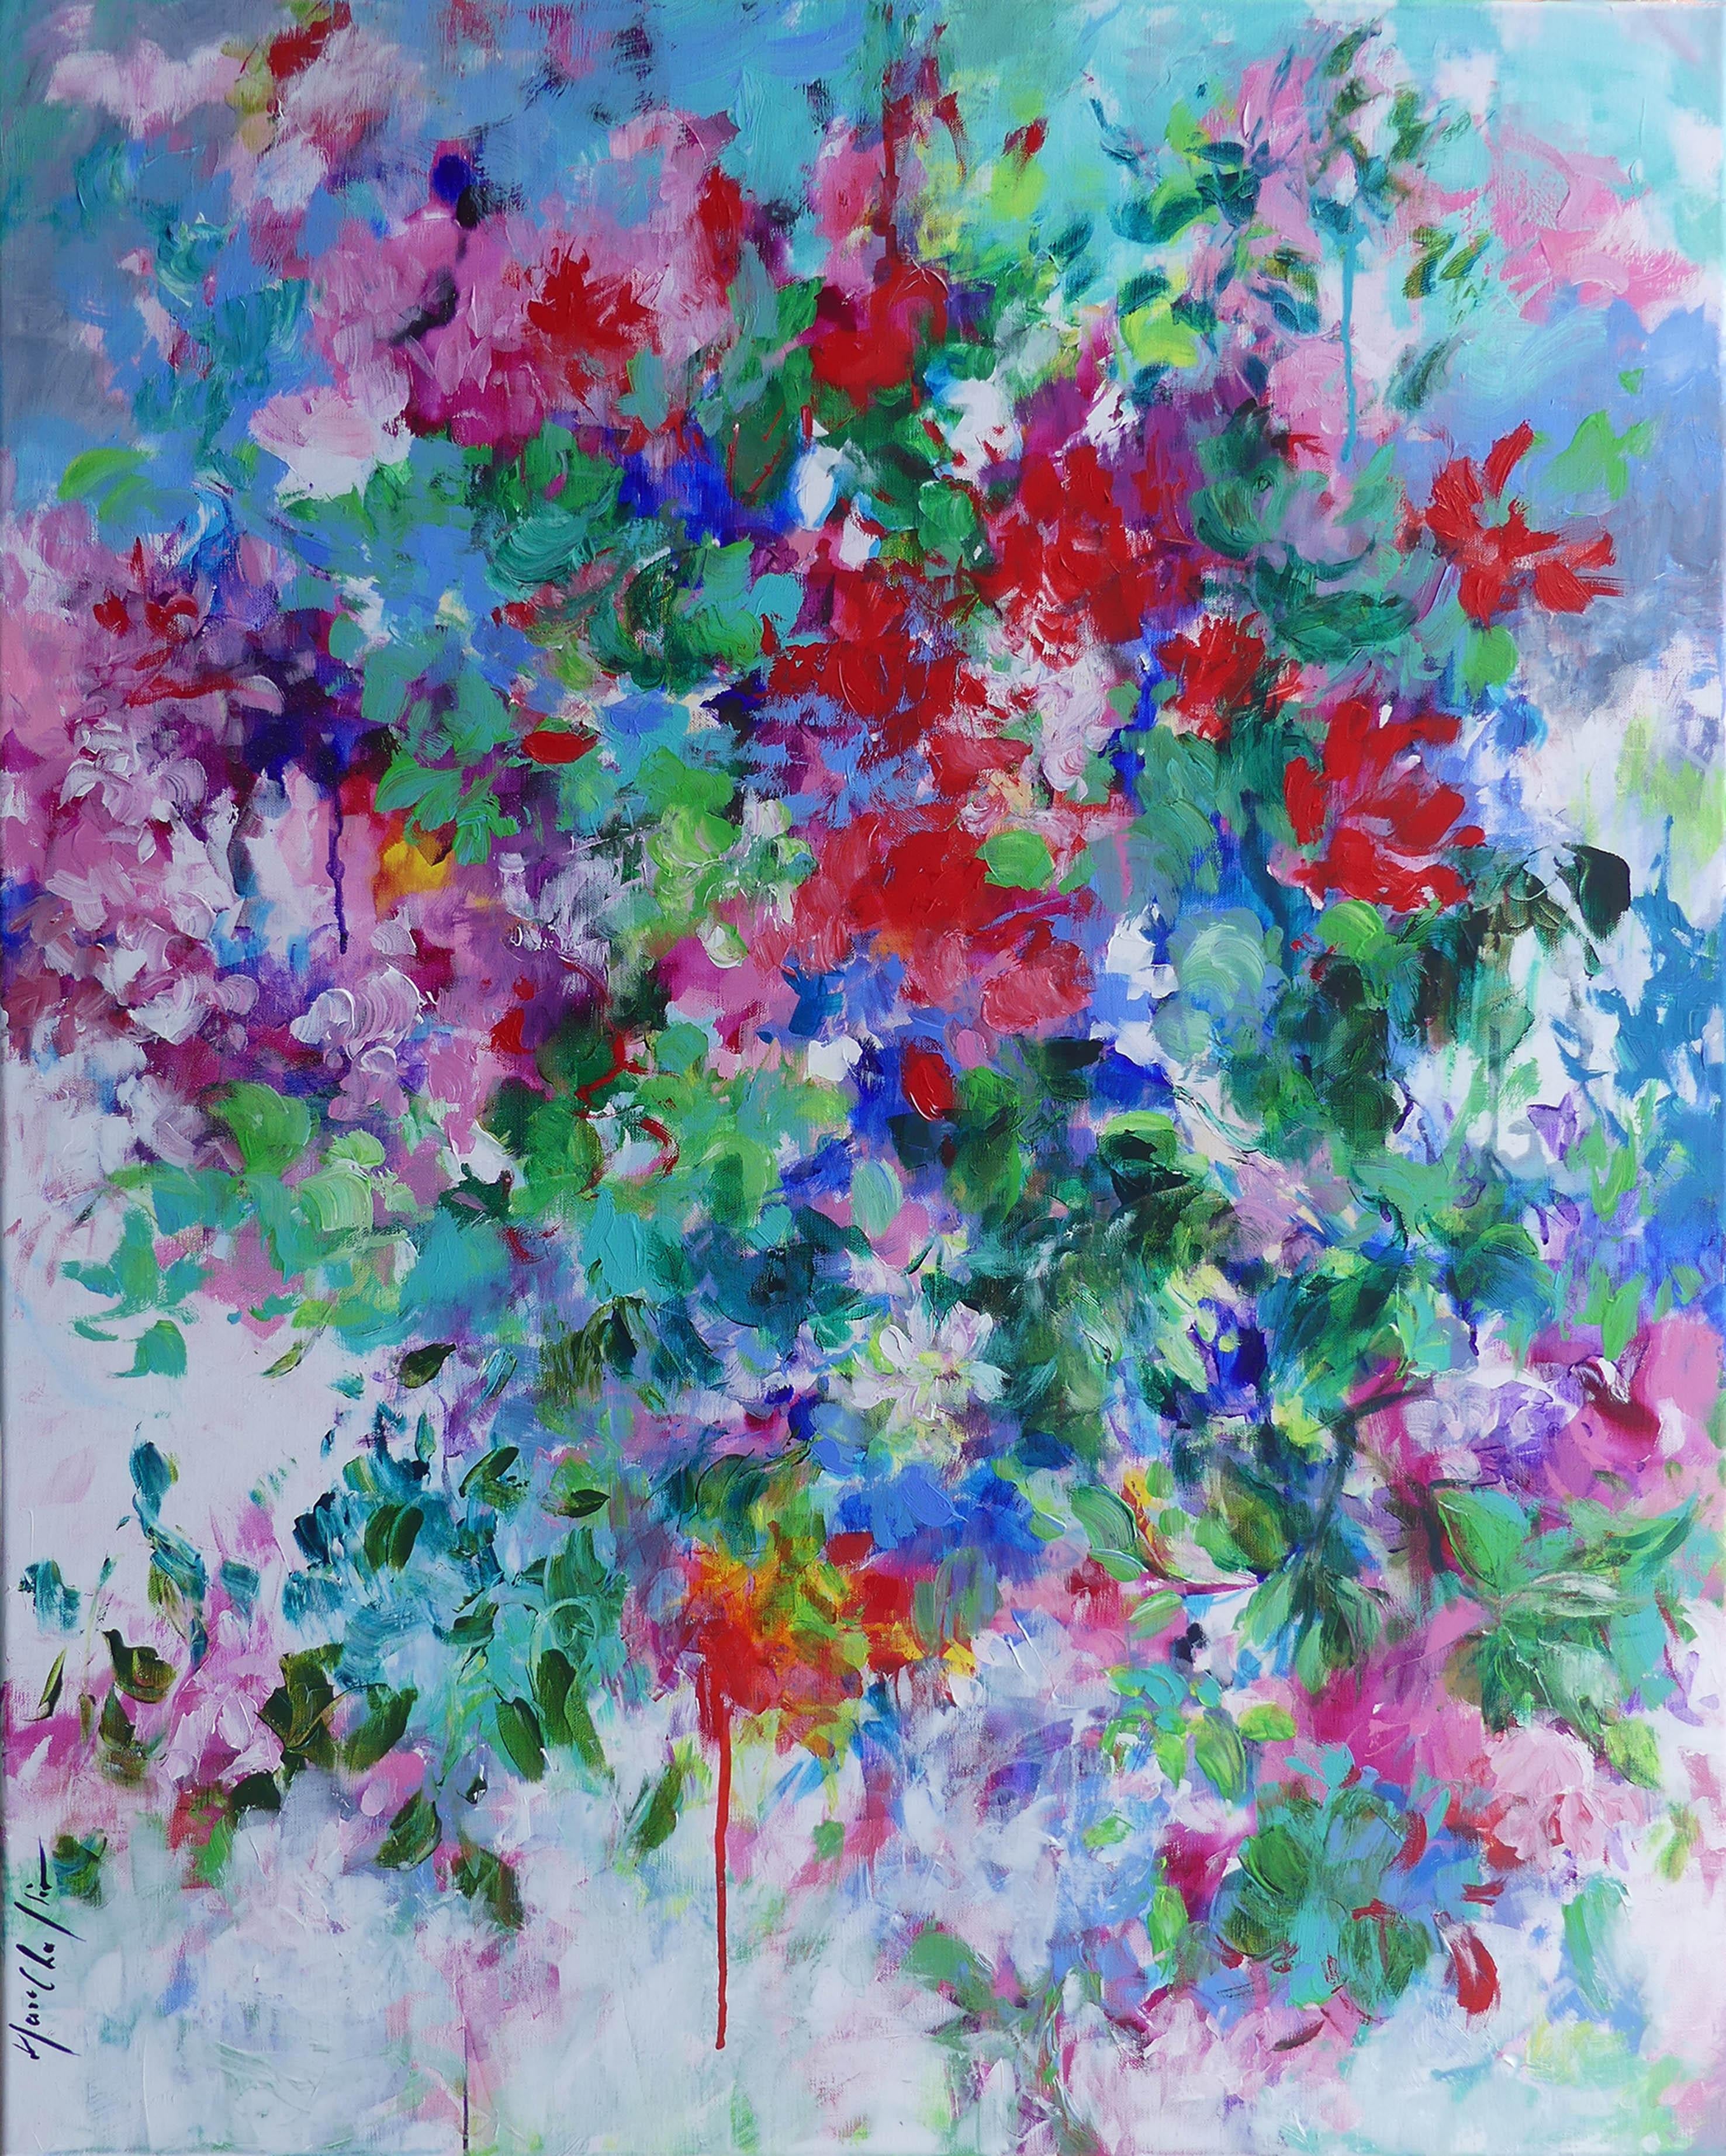 Landscape Painting Mary Chaplin - The season of happiness, Original art, Landscape, floral, Abstract, Nature 